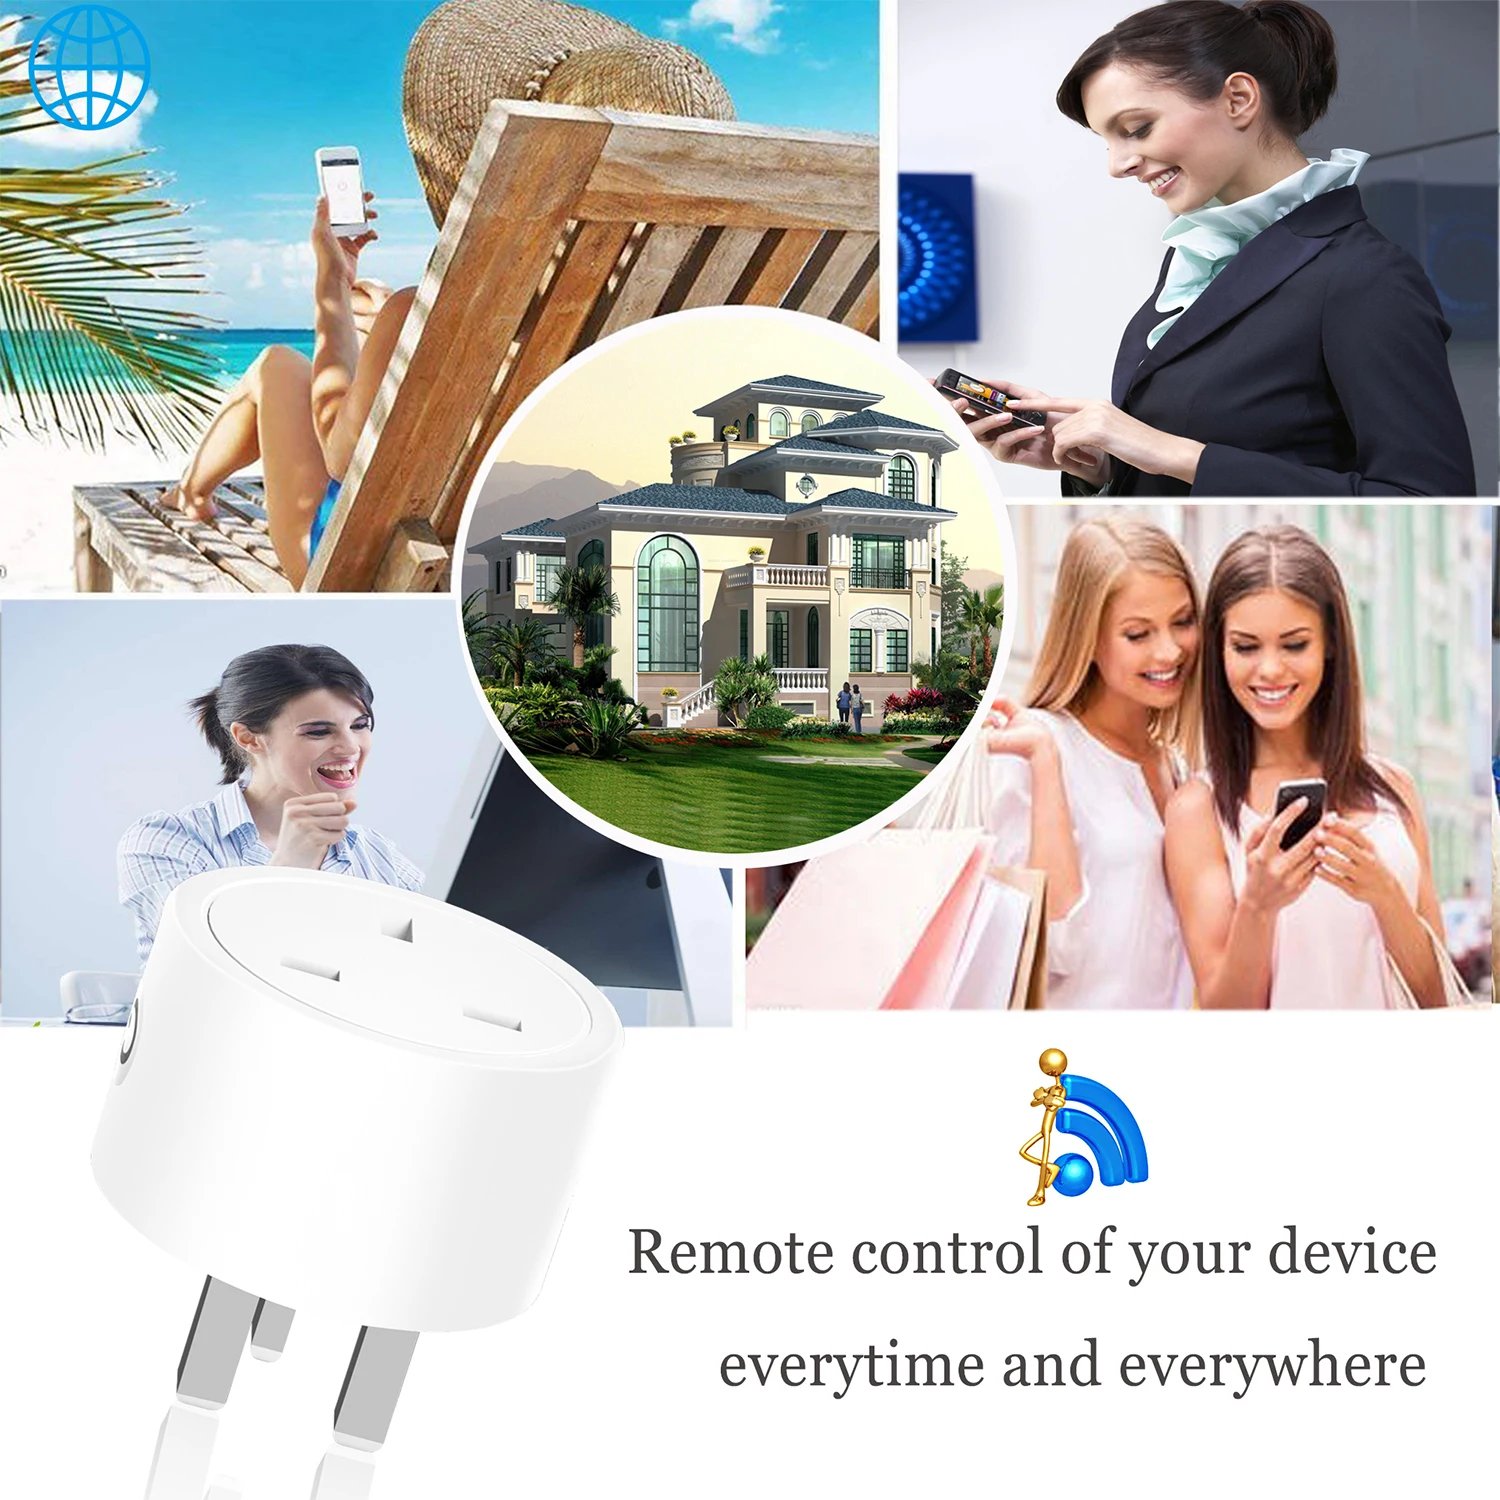 https://ae01.alicdn.com/kf/S6f77134c1d024f8fa3333fae18619e291/UK-13A-Zigbee-Smart-Plug-and-Socket-Smart-Home-APP-Timing-Voice-and-Remote-Control-Works.jpg